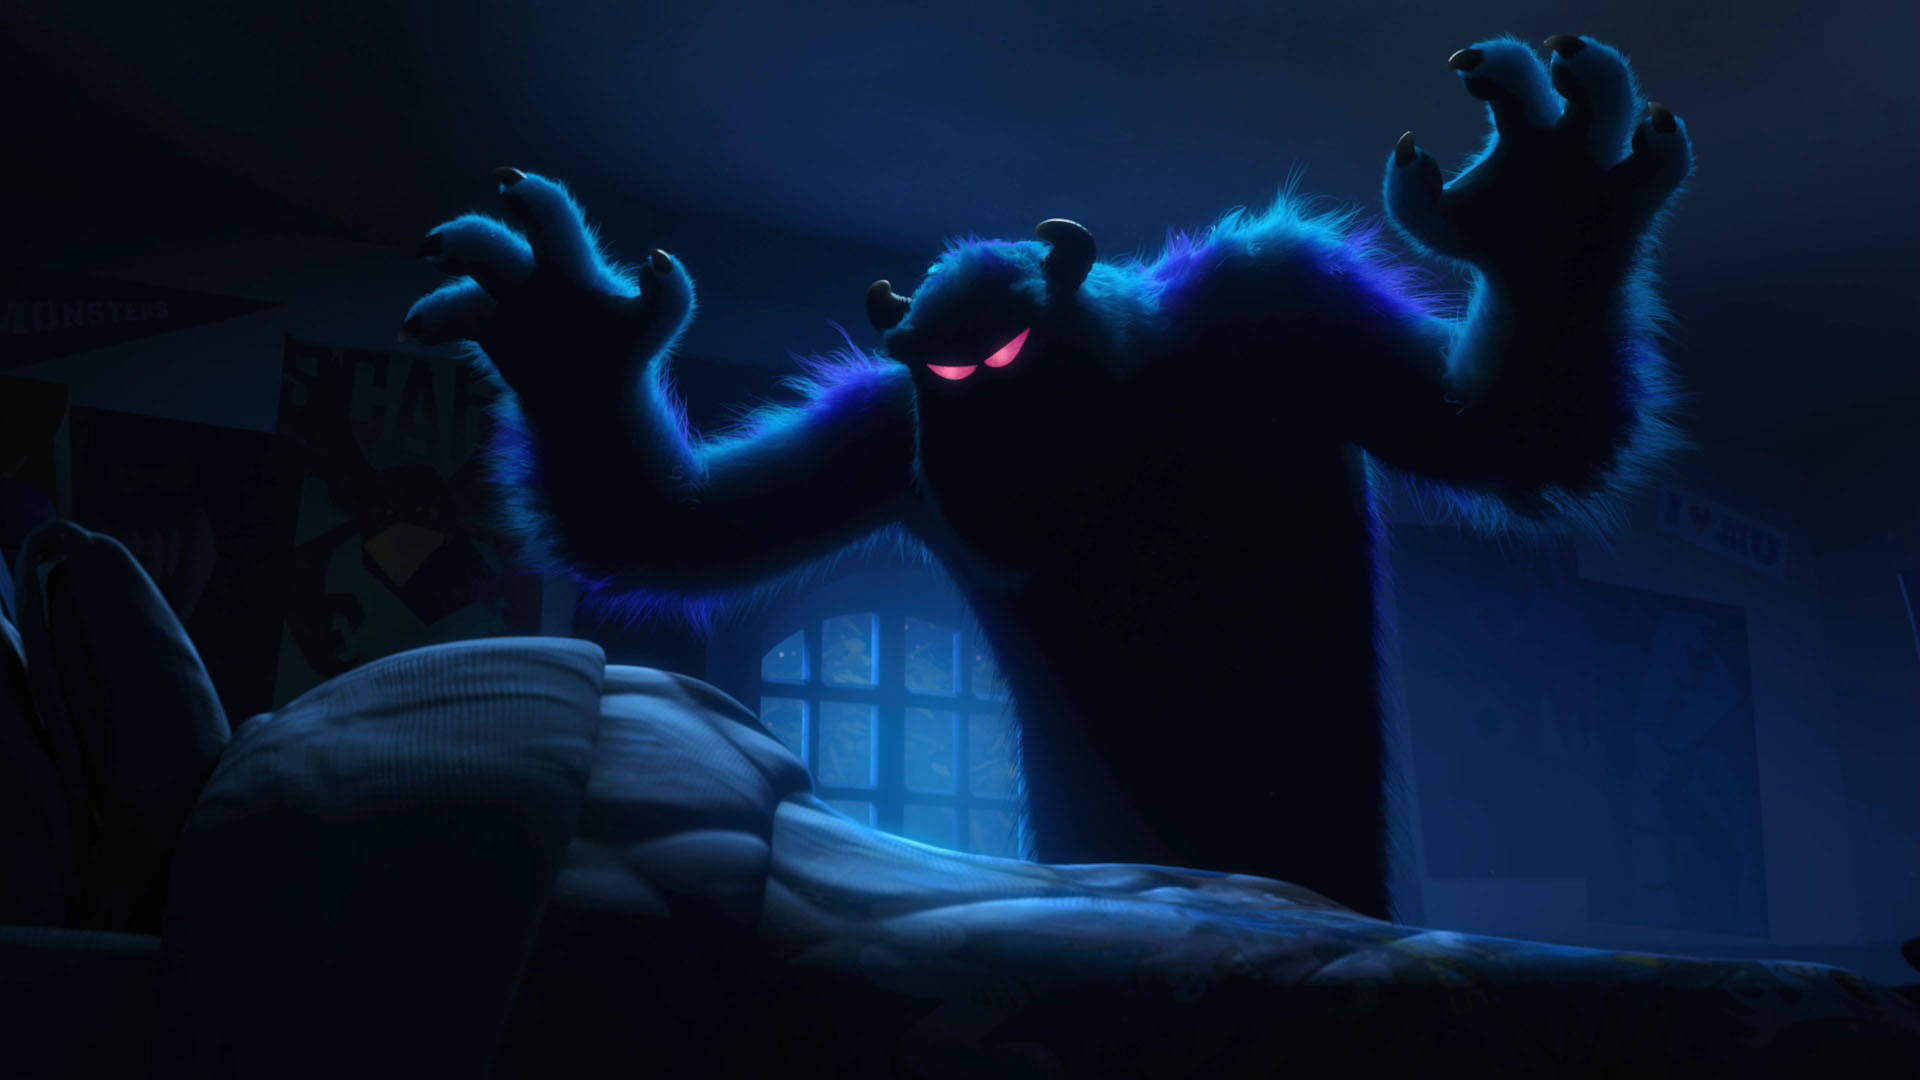 Sulley The Top Scarer Wallpaper